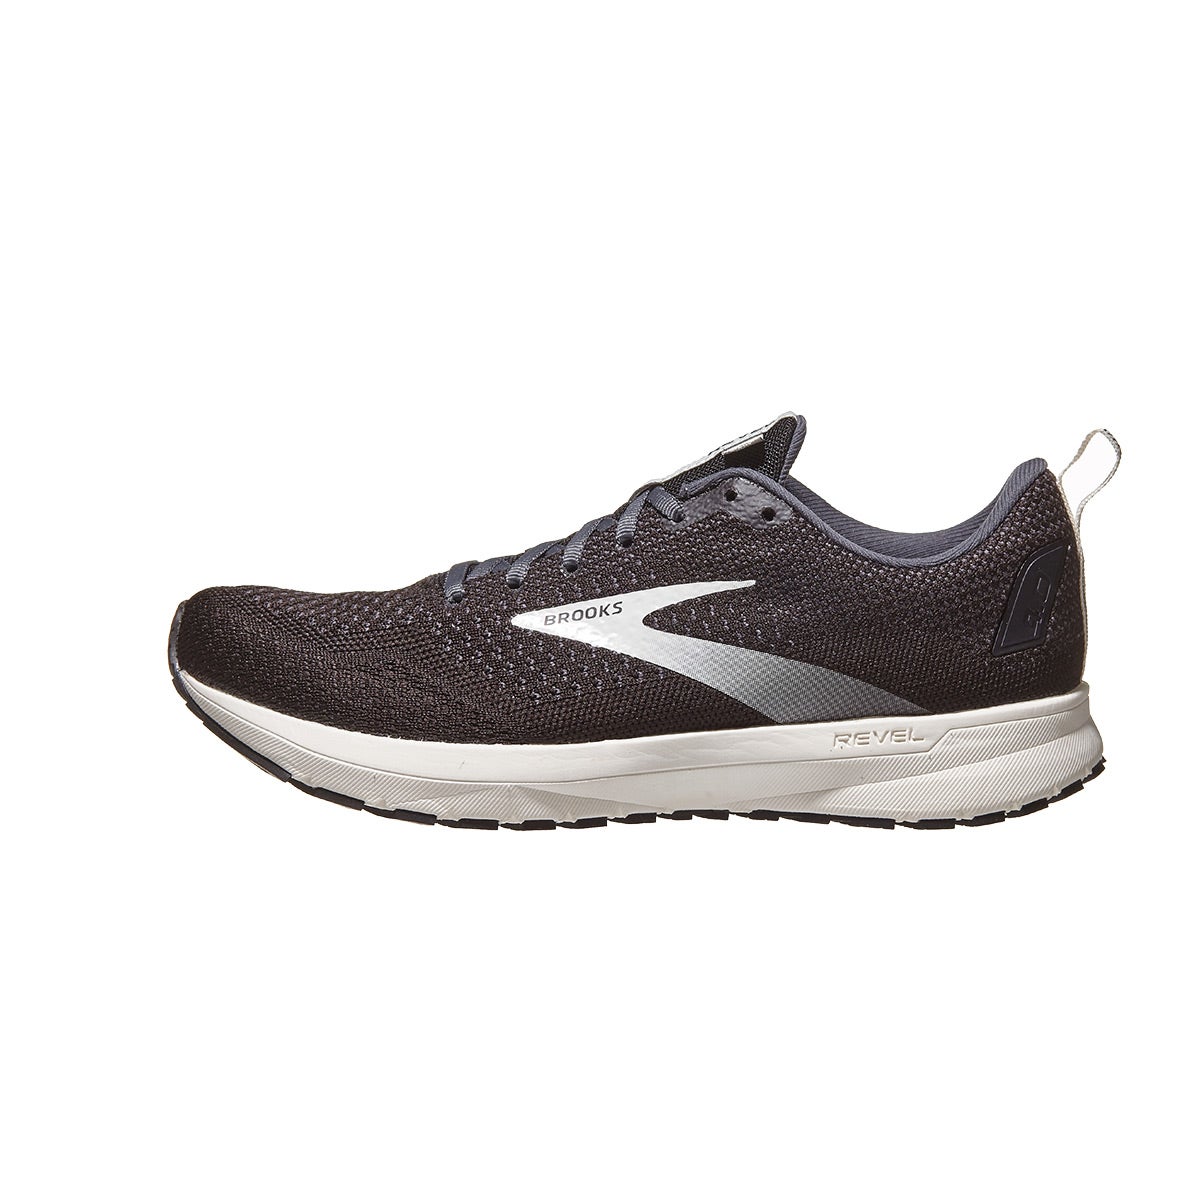 Brooks Revel 4 Women's Shoes Black/Oyster/Silver 360° View | Running ...